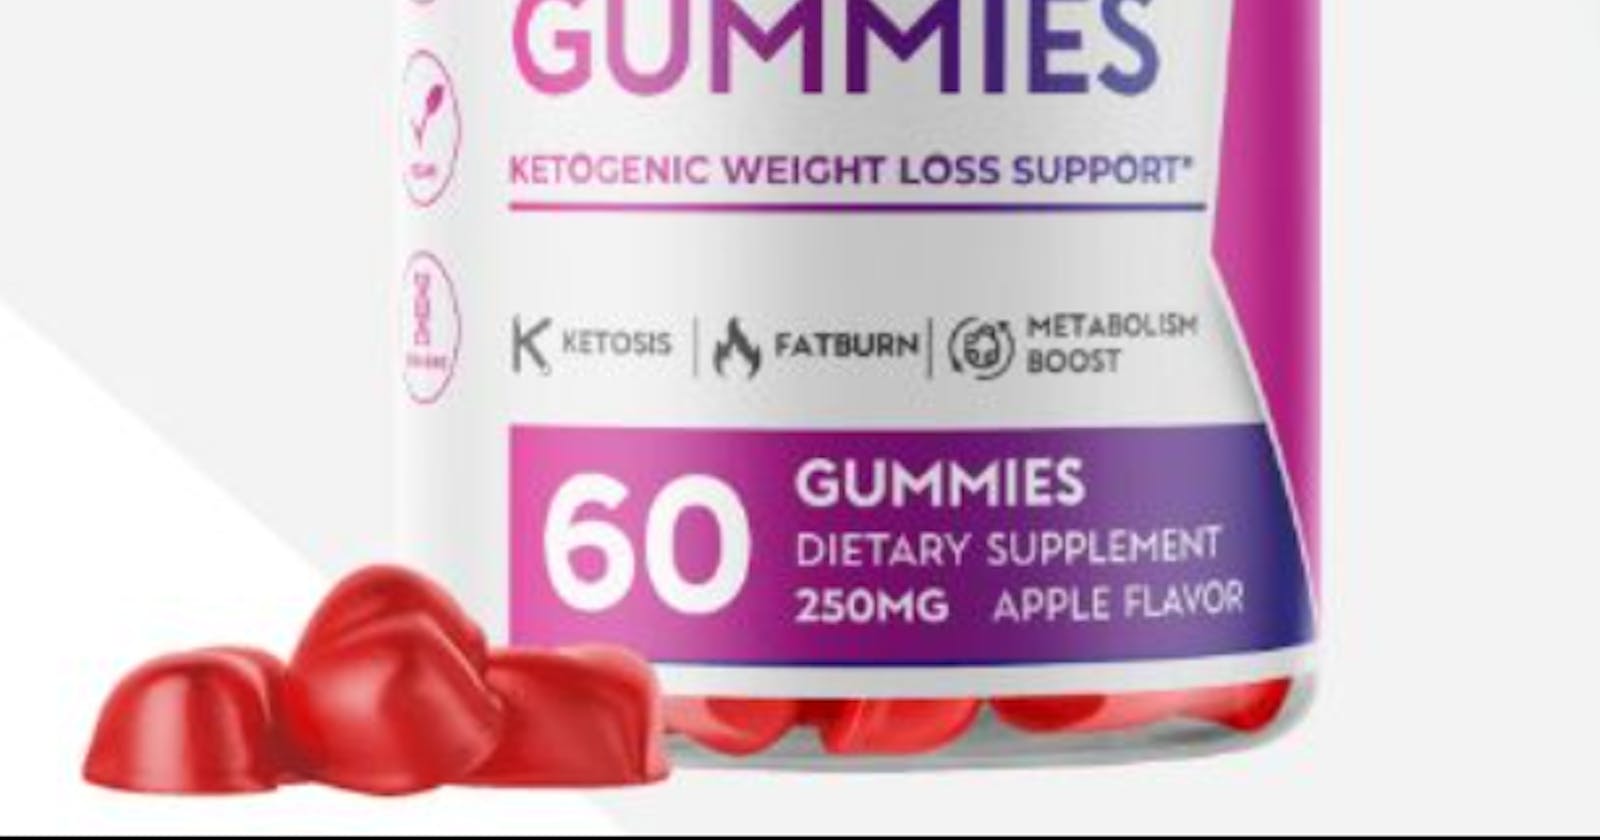 Summer Keto + ACV Gummies For Weight Loss?